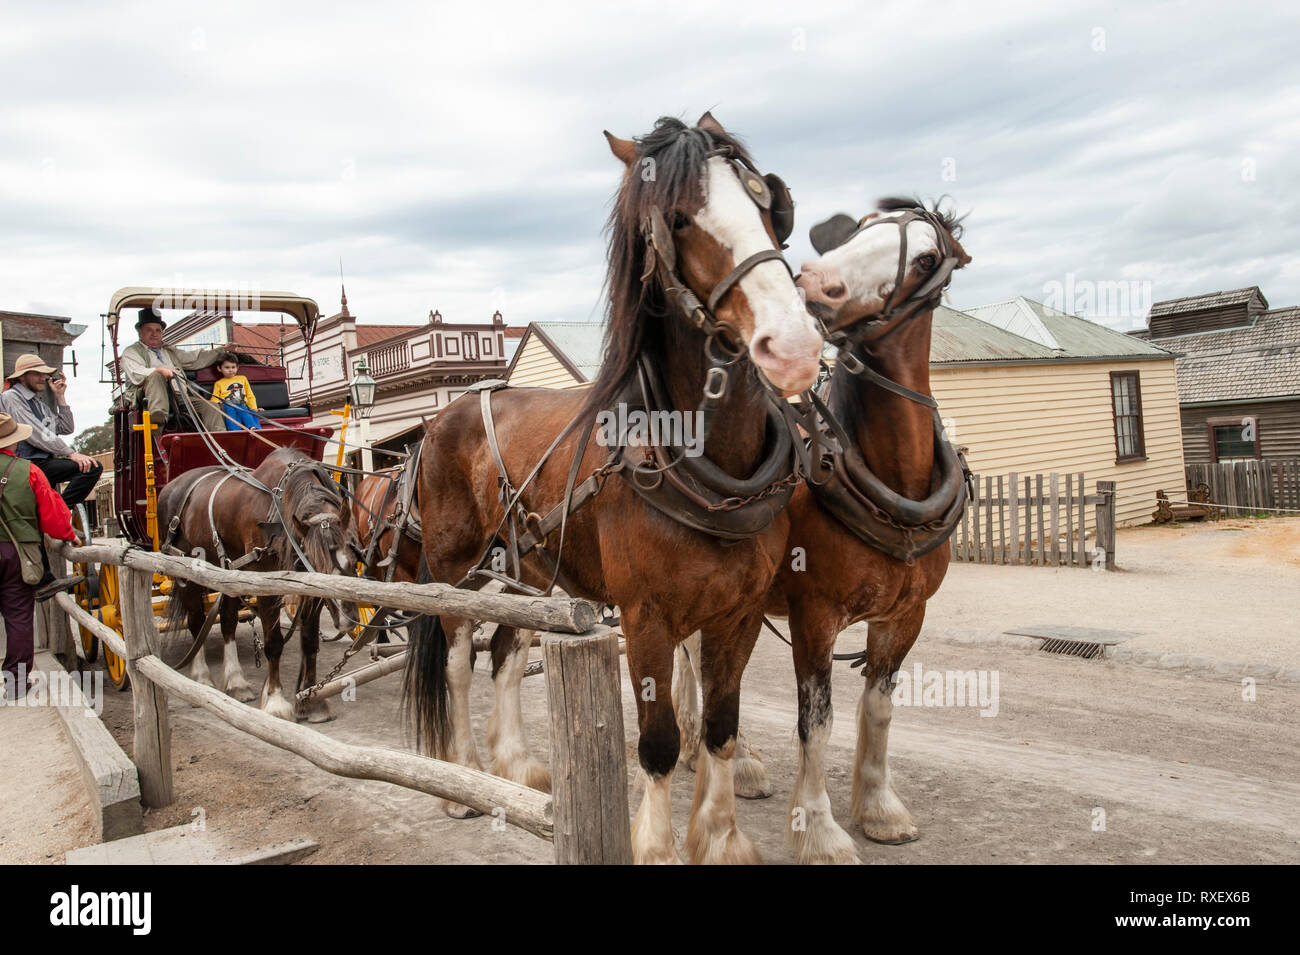 Sovereign Hill open air museum Foto Stock